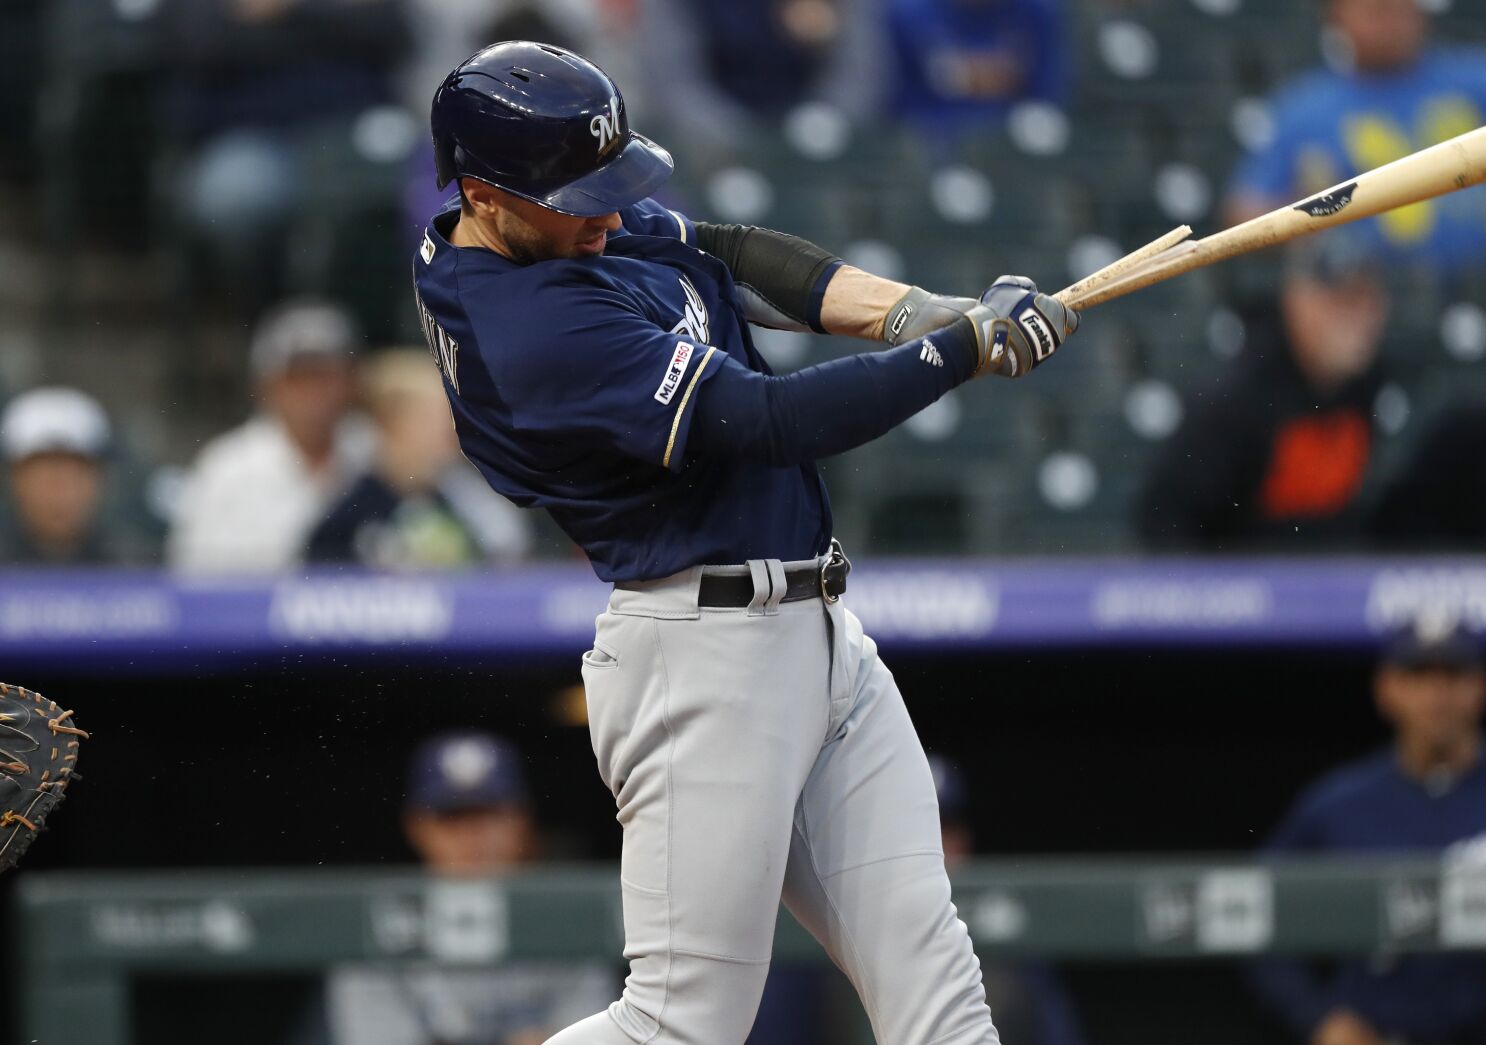 Rockies open second half with painful, 13-inning loss to Brewers